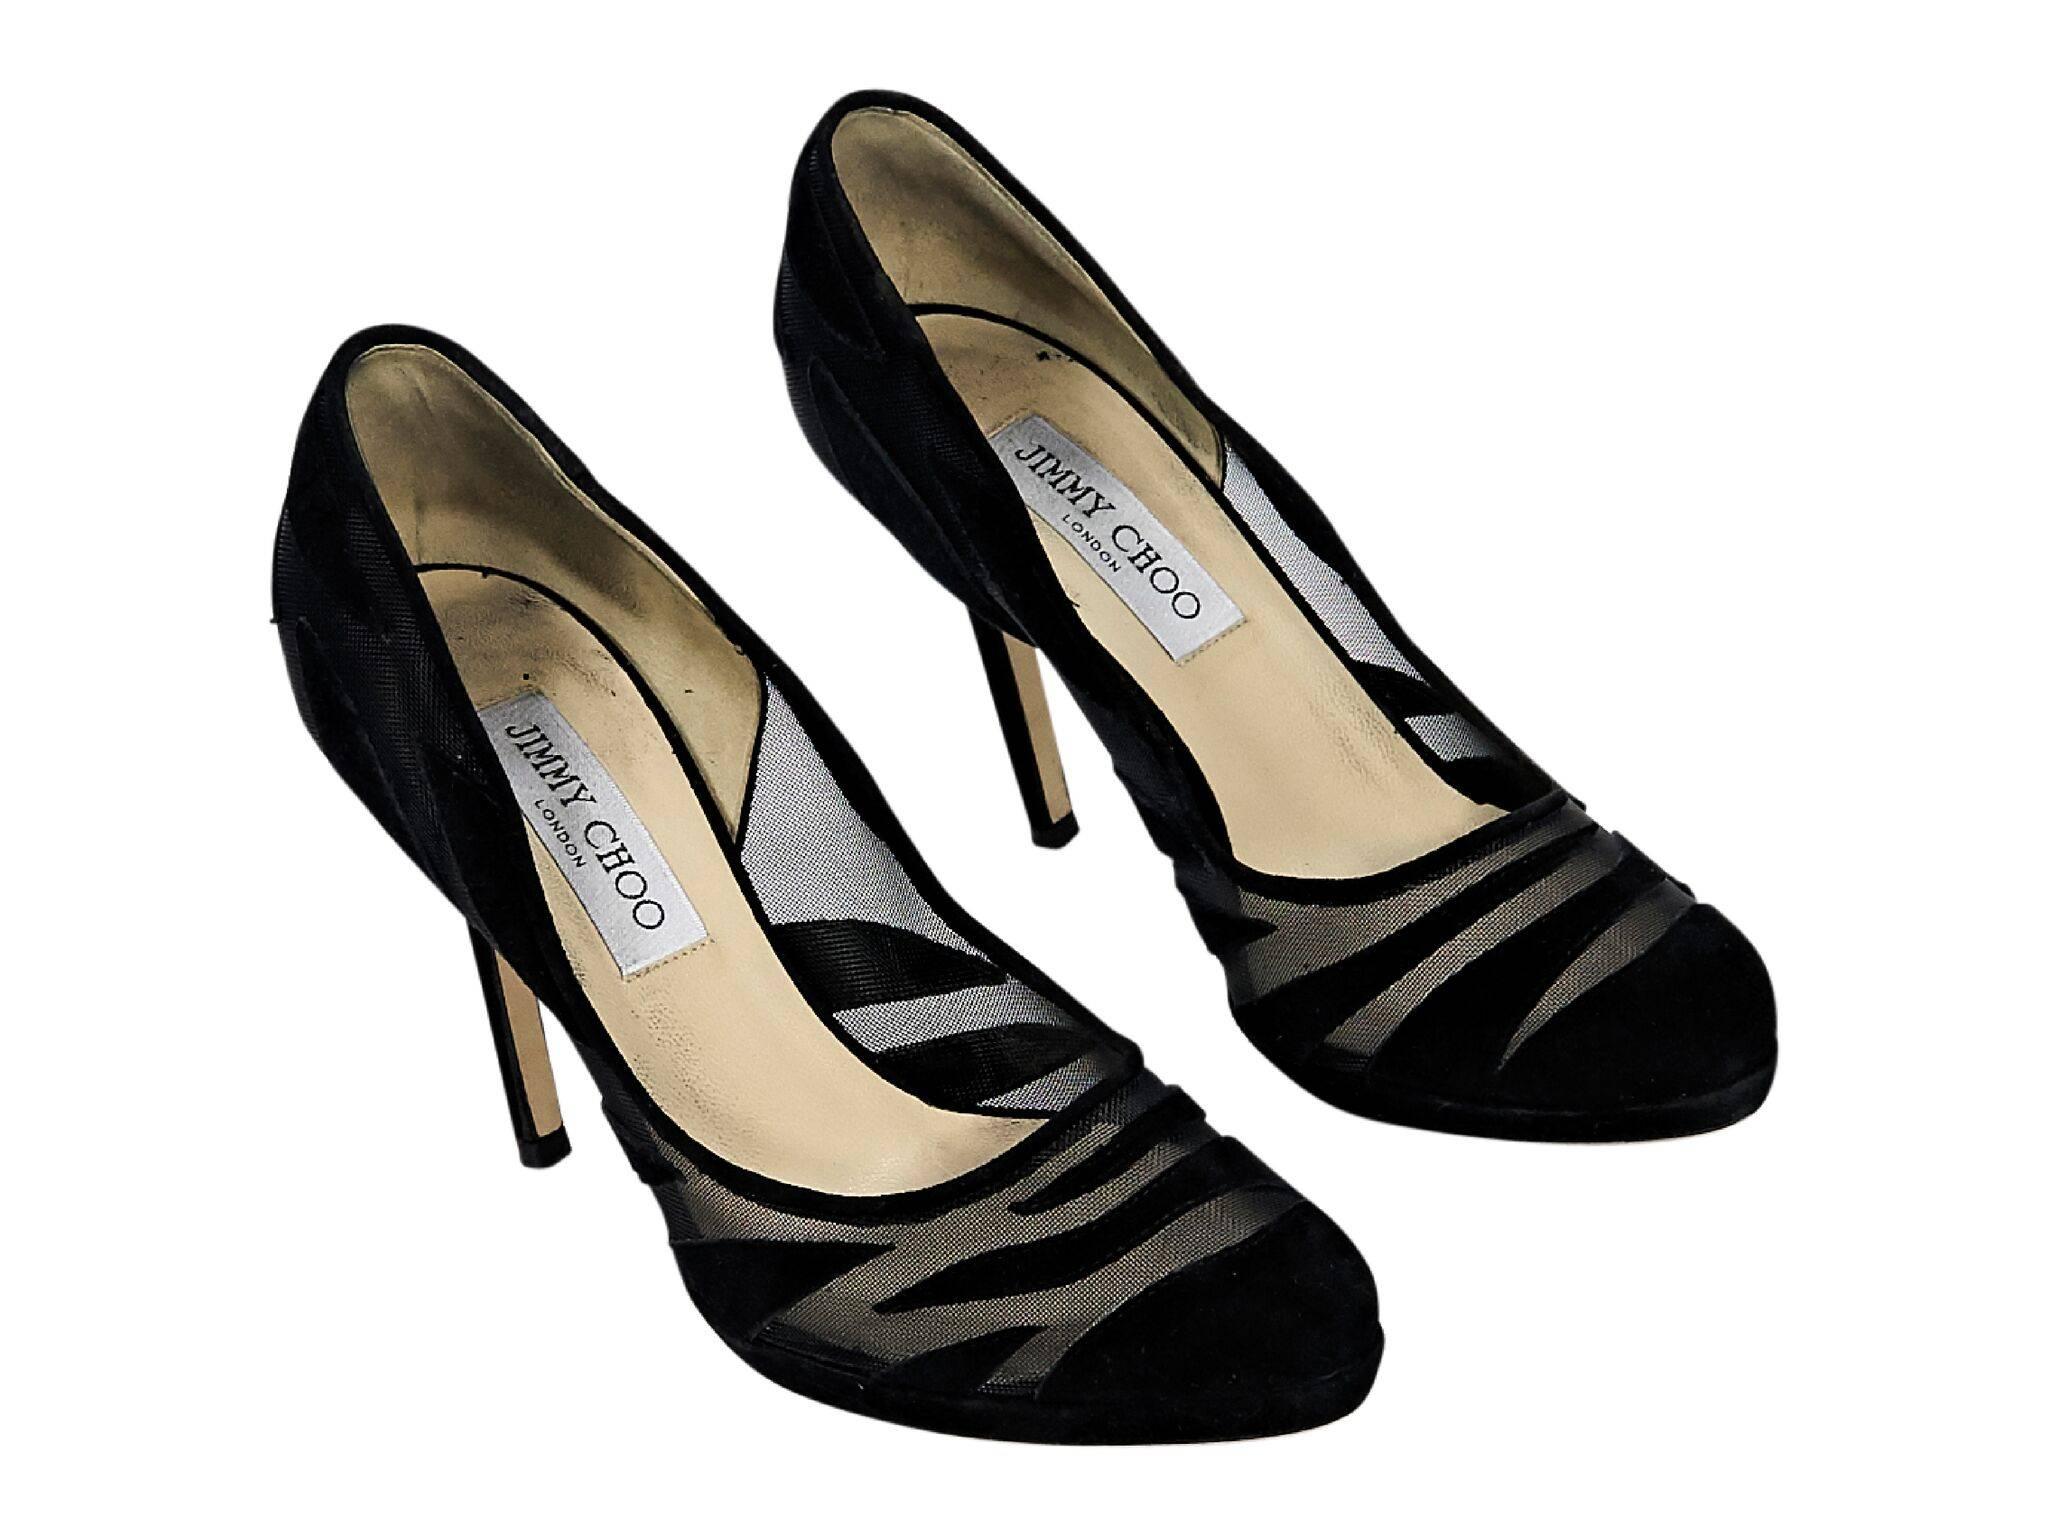 Product details:  Black suede and mesh pumps by Jimmy Choo.  Round toe.  Slip-on style. 
Condition: Pre-owned. Very good. 
Est. Retail $595